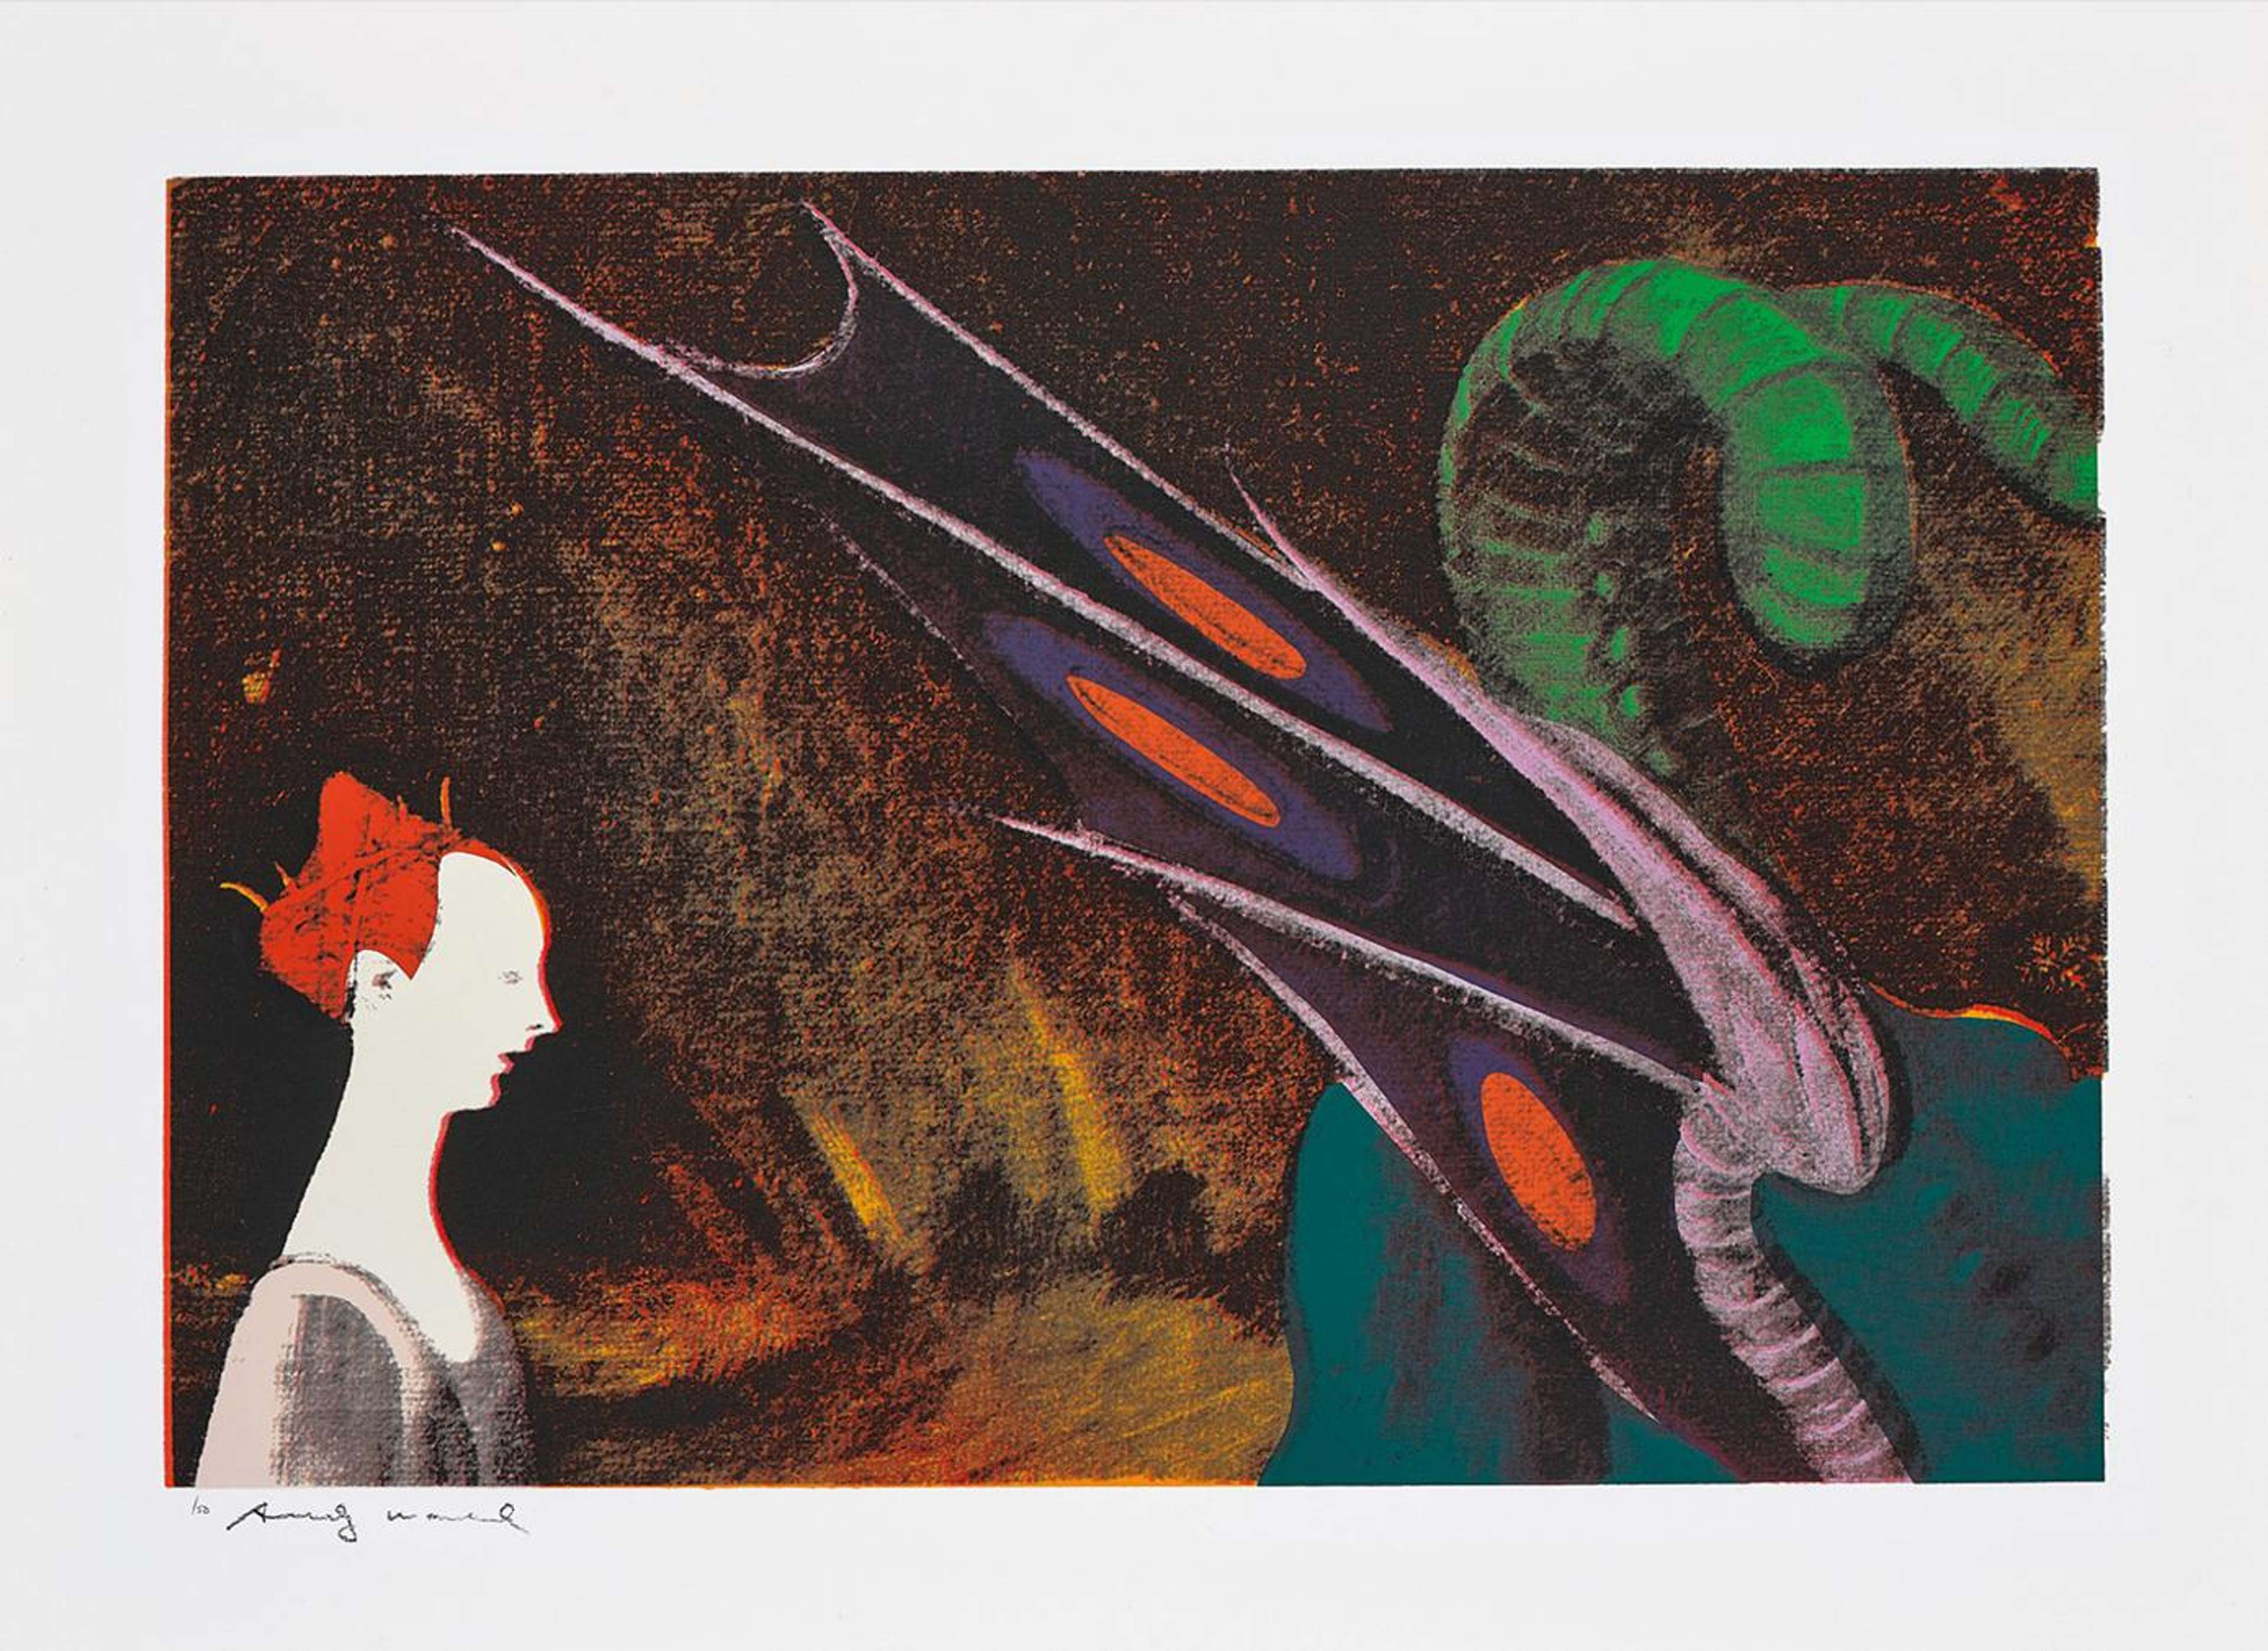 A screenprint by Andy Warhol depicting a cross section of Paolo Uccello's St. George And The Dragon